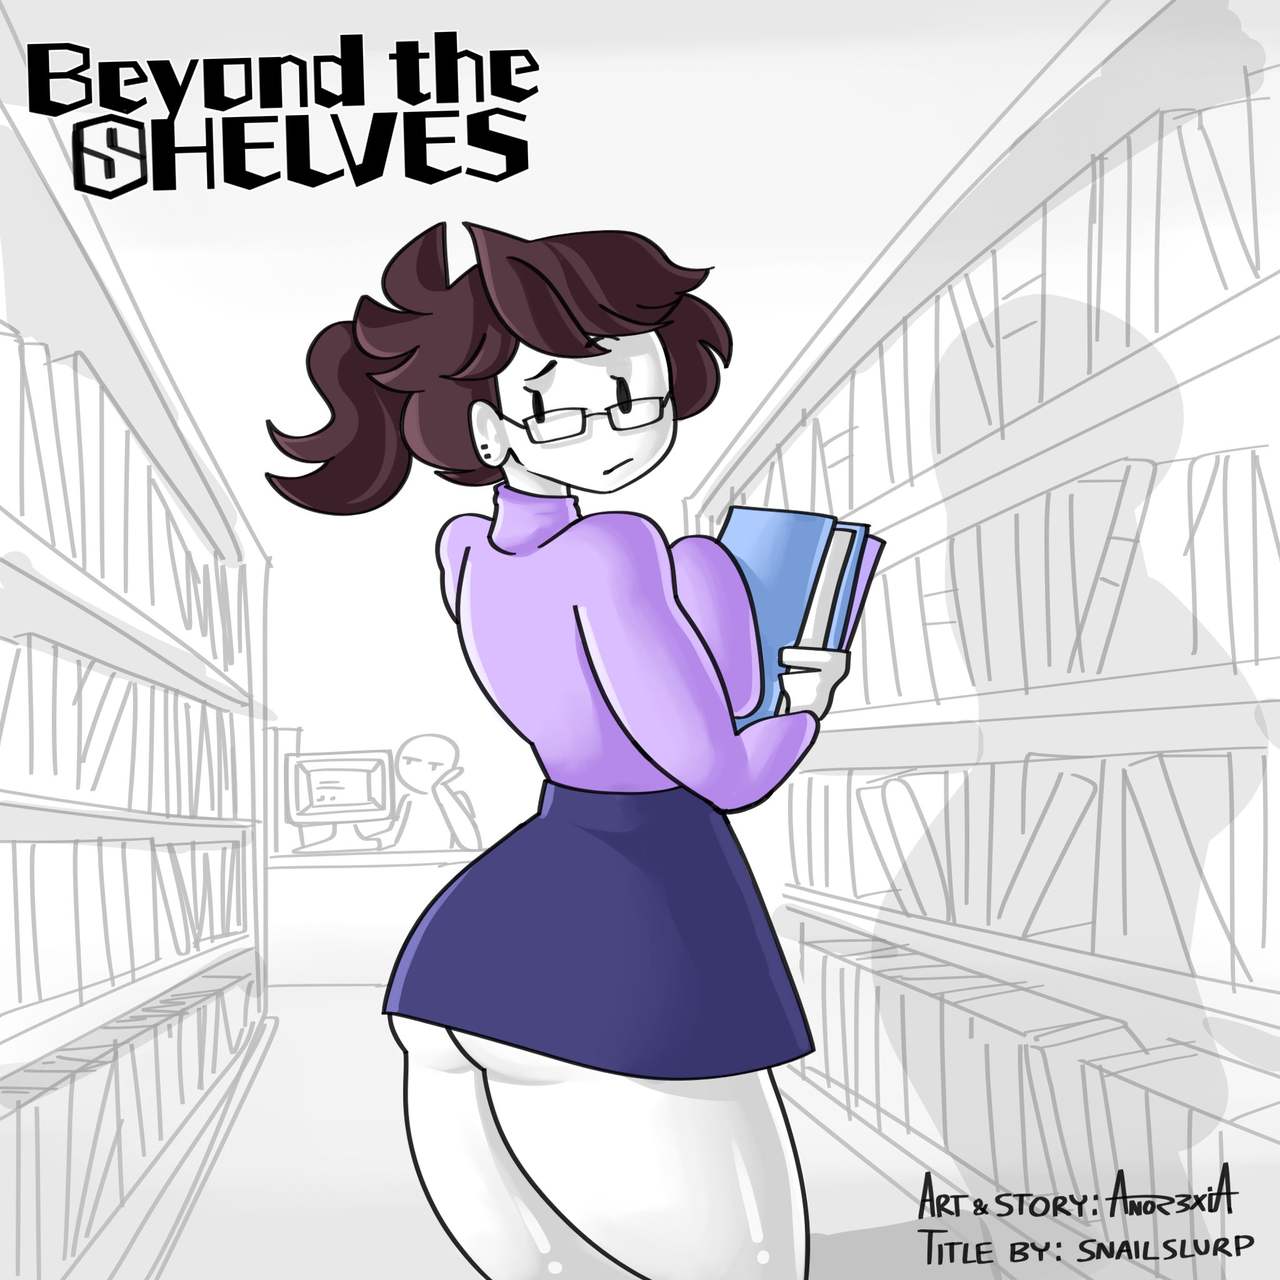 Beyond the shelves anor3xia